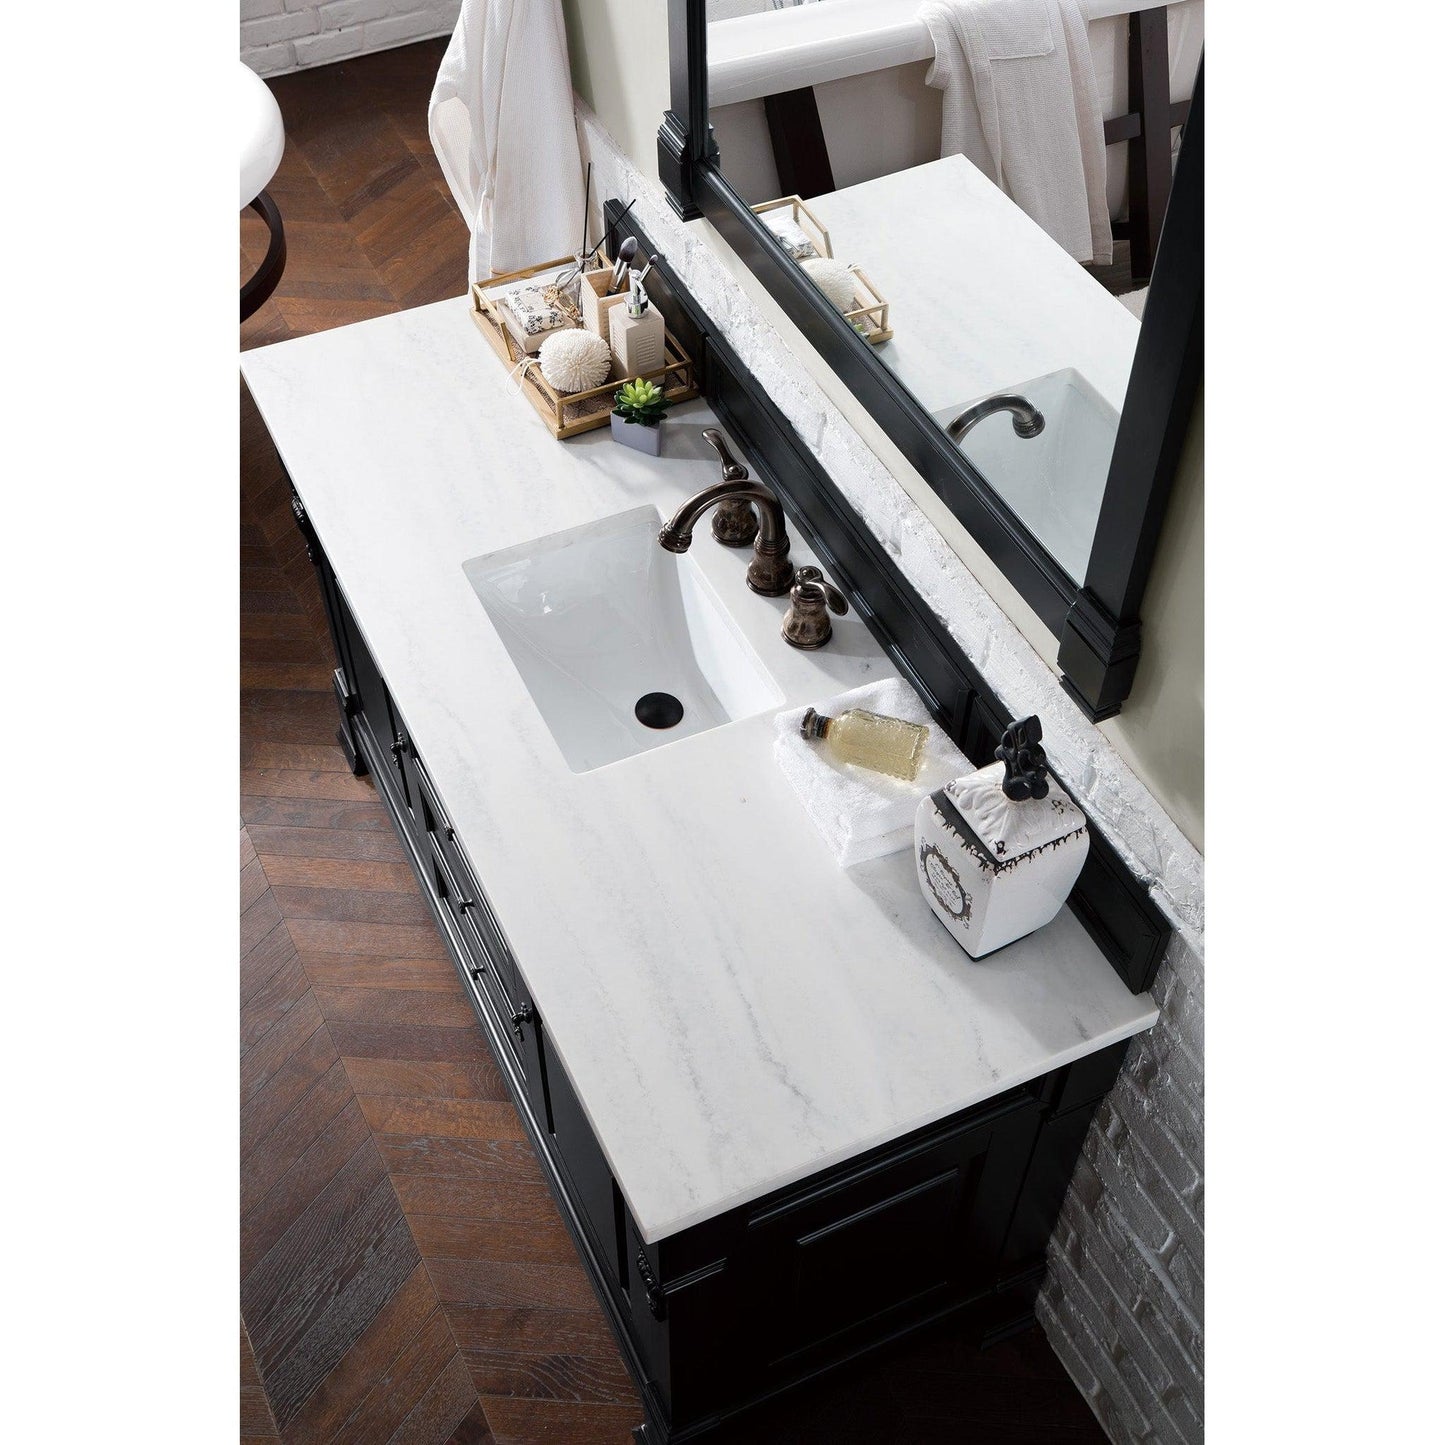 James Martin Vanities Brookfield 60" Antique Black Single Vanity With 3cm Arctic Fall Solid Surface Top